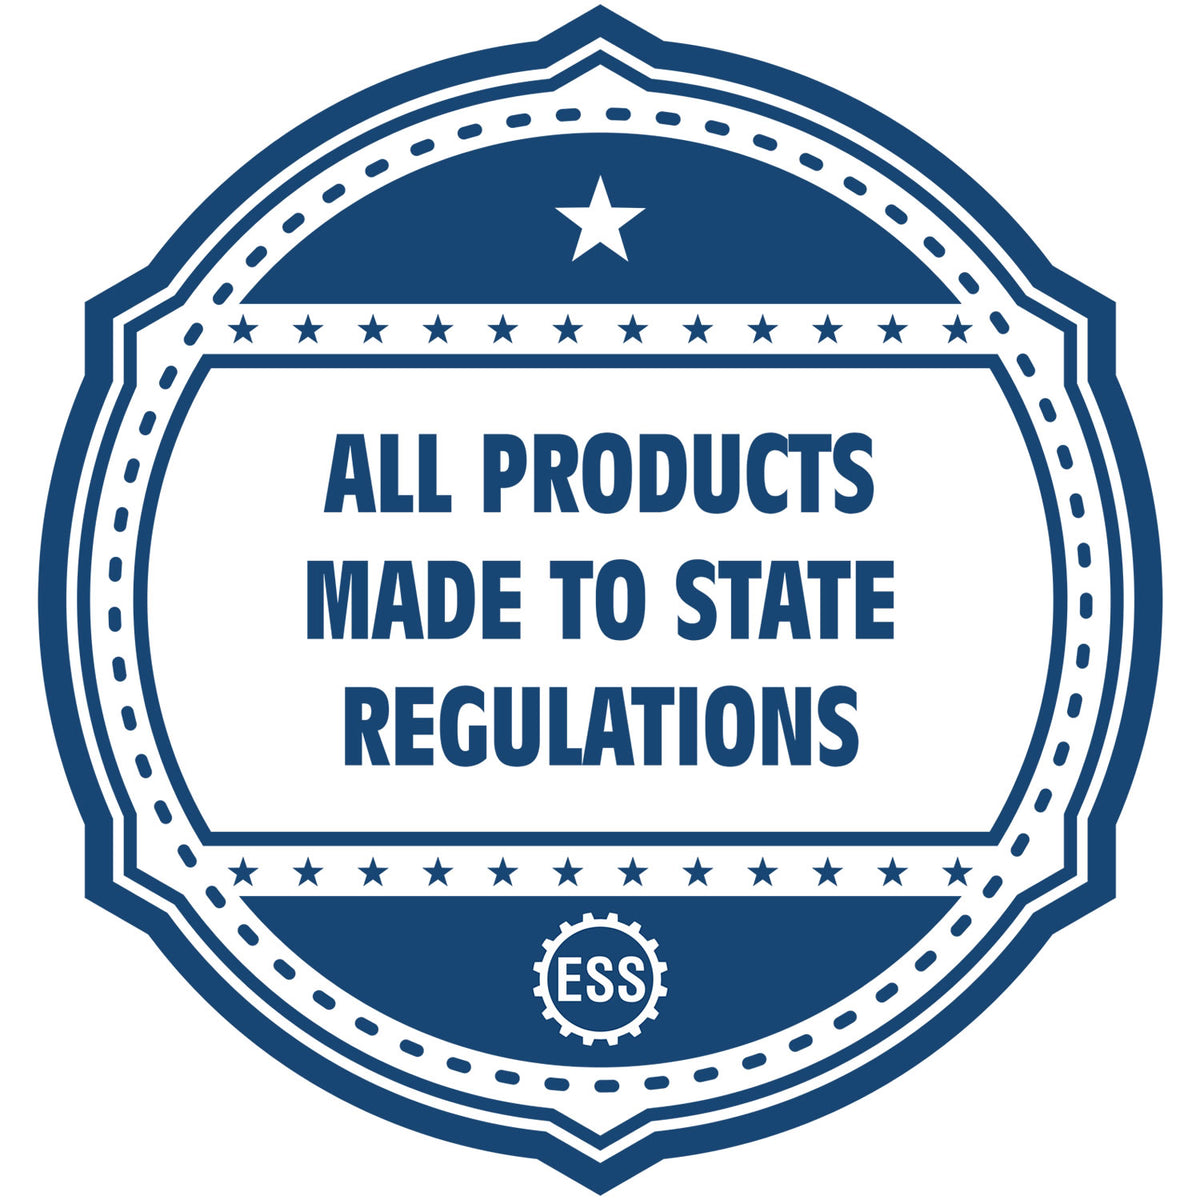 An icon or badge element for the State of Iowa Soft Land Surveyor Embossing Seal showing that this product is made in compliance with state regulations.